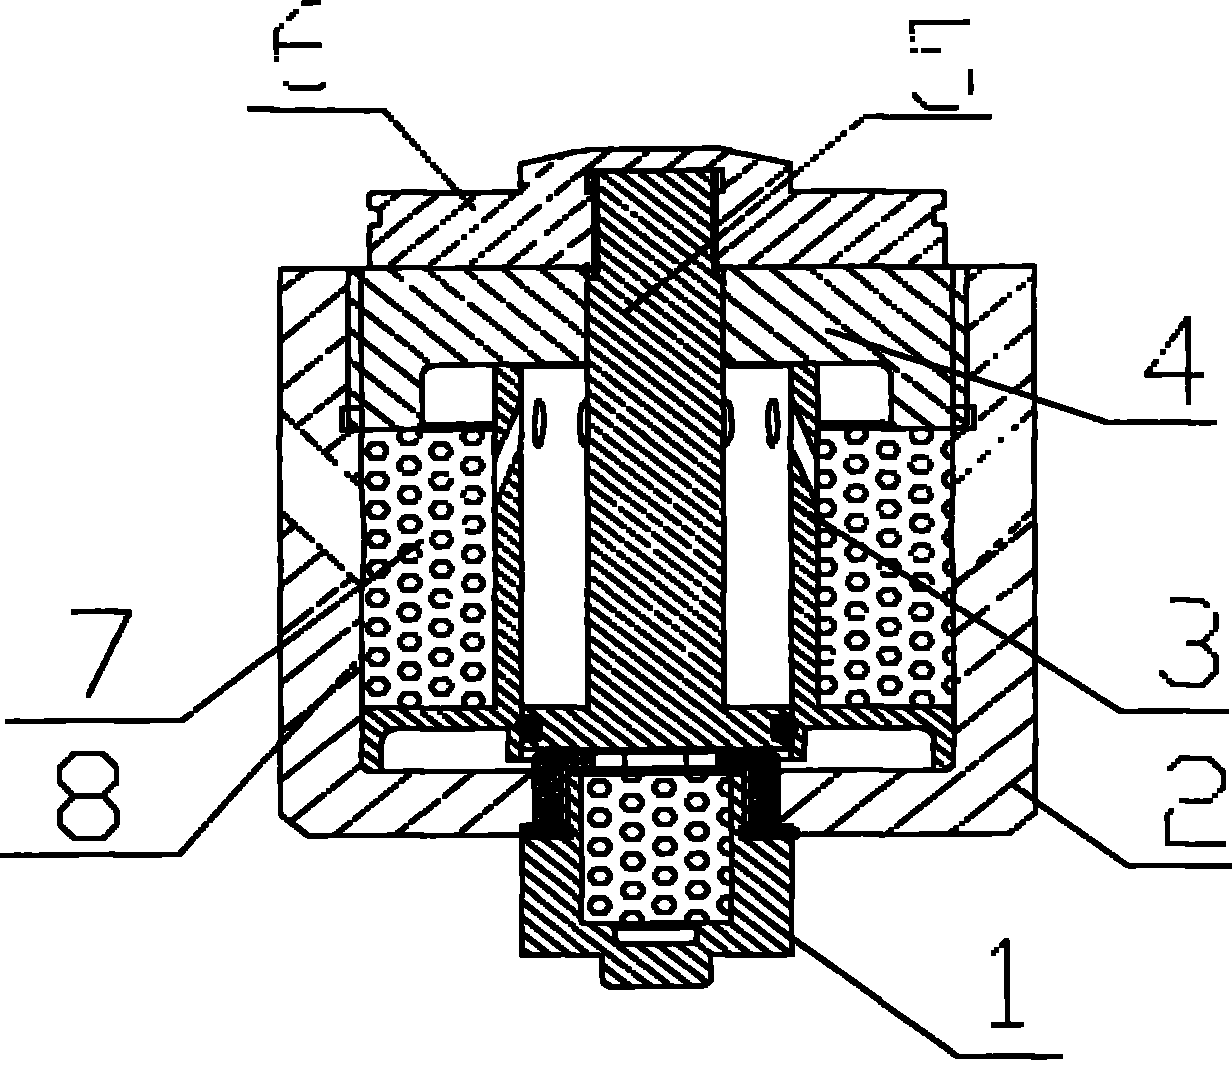 Piston movement and ignition separated gas power device